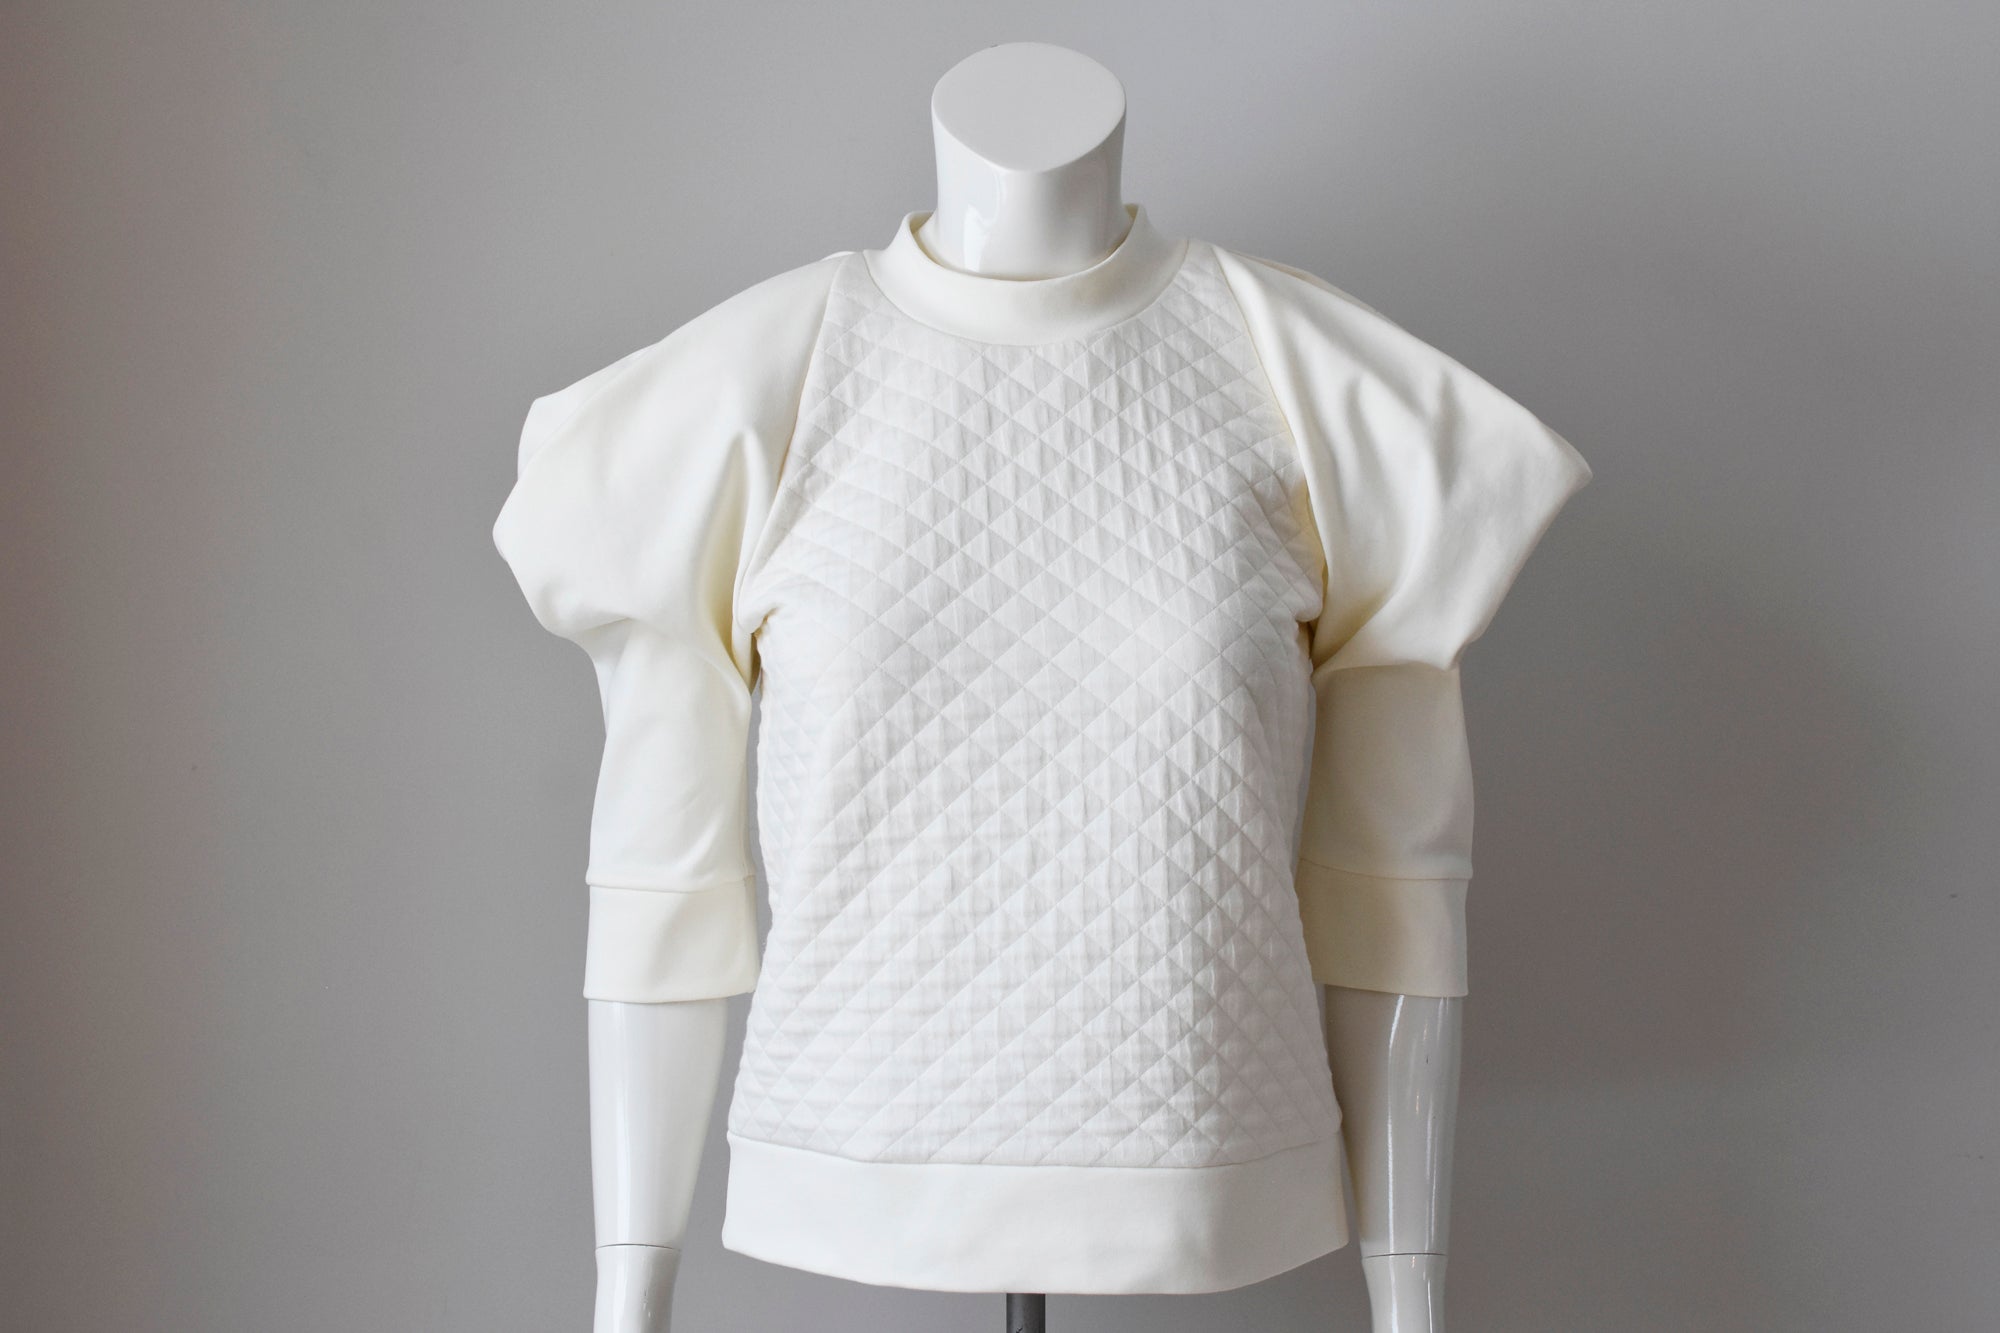 MUSCLE-SWEATER white